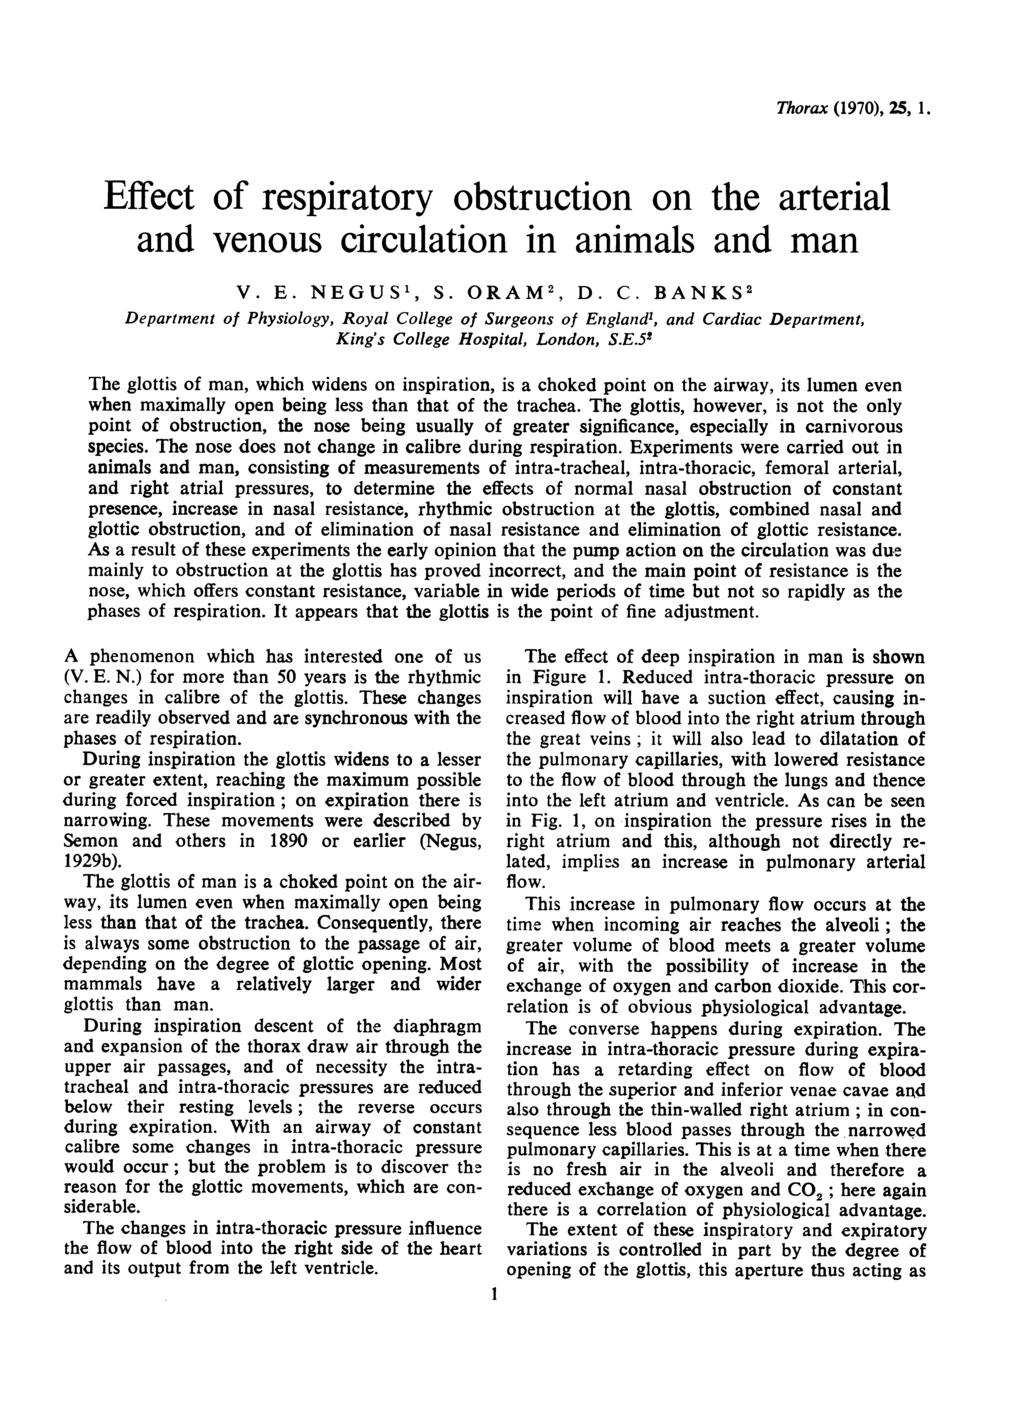 Thorax (1970), 25, 1. Effect of respiratory obstruction on the arterial and venous circulation in animals and man V. E. NEGUS1, S. ORAM2, D. C.